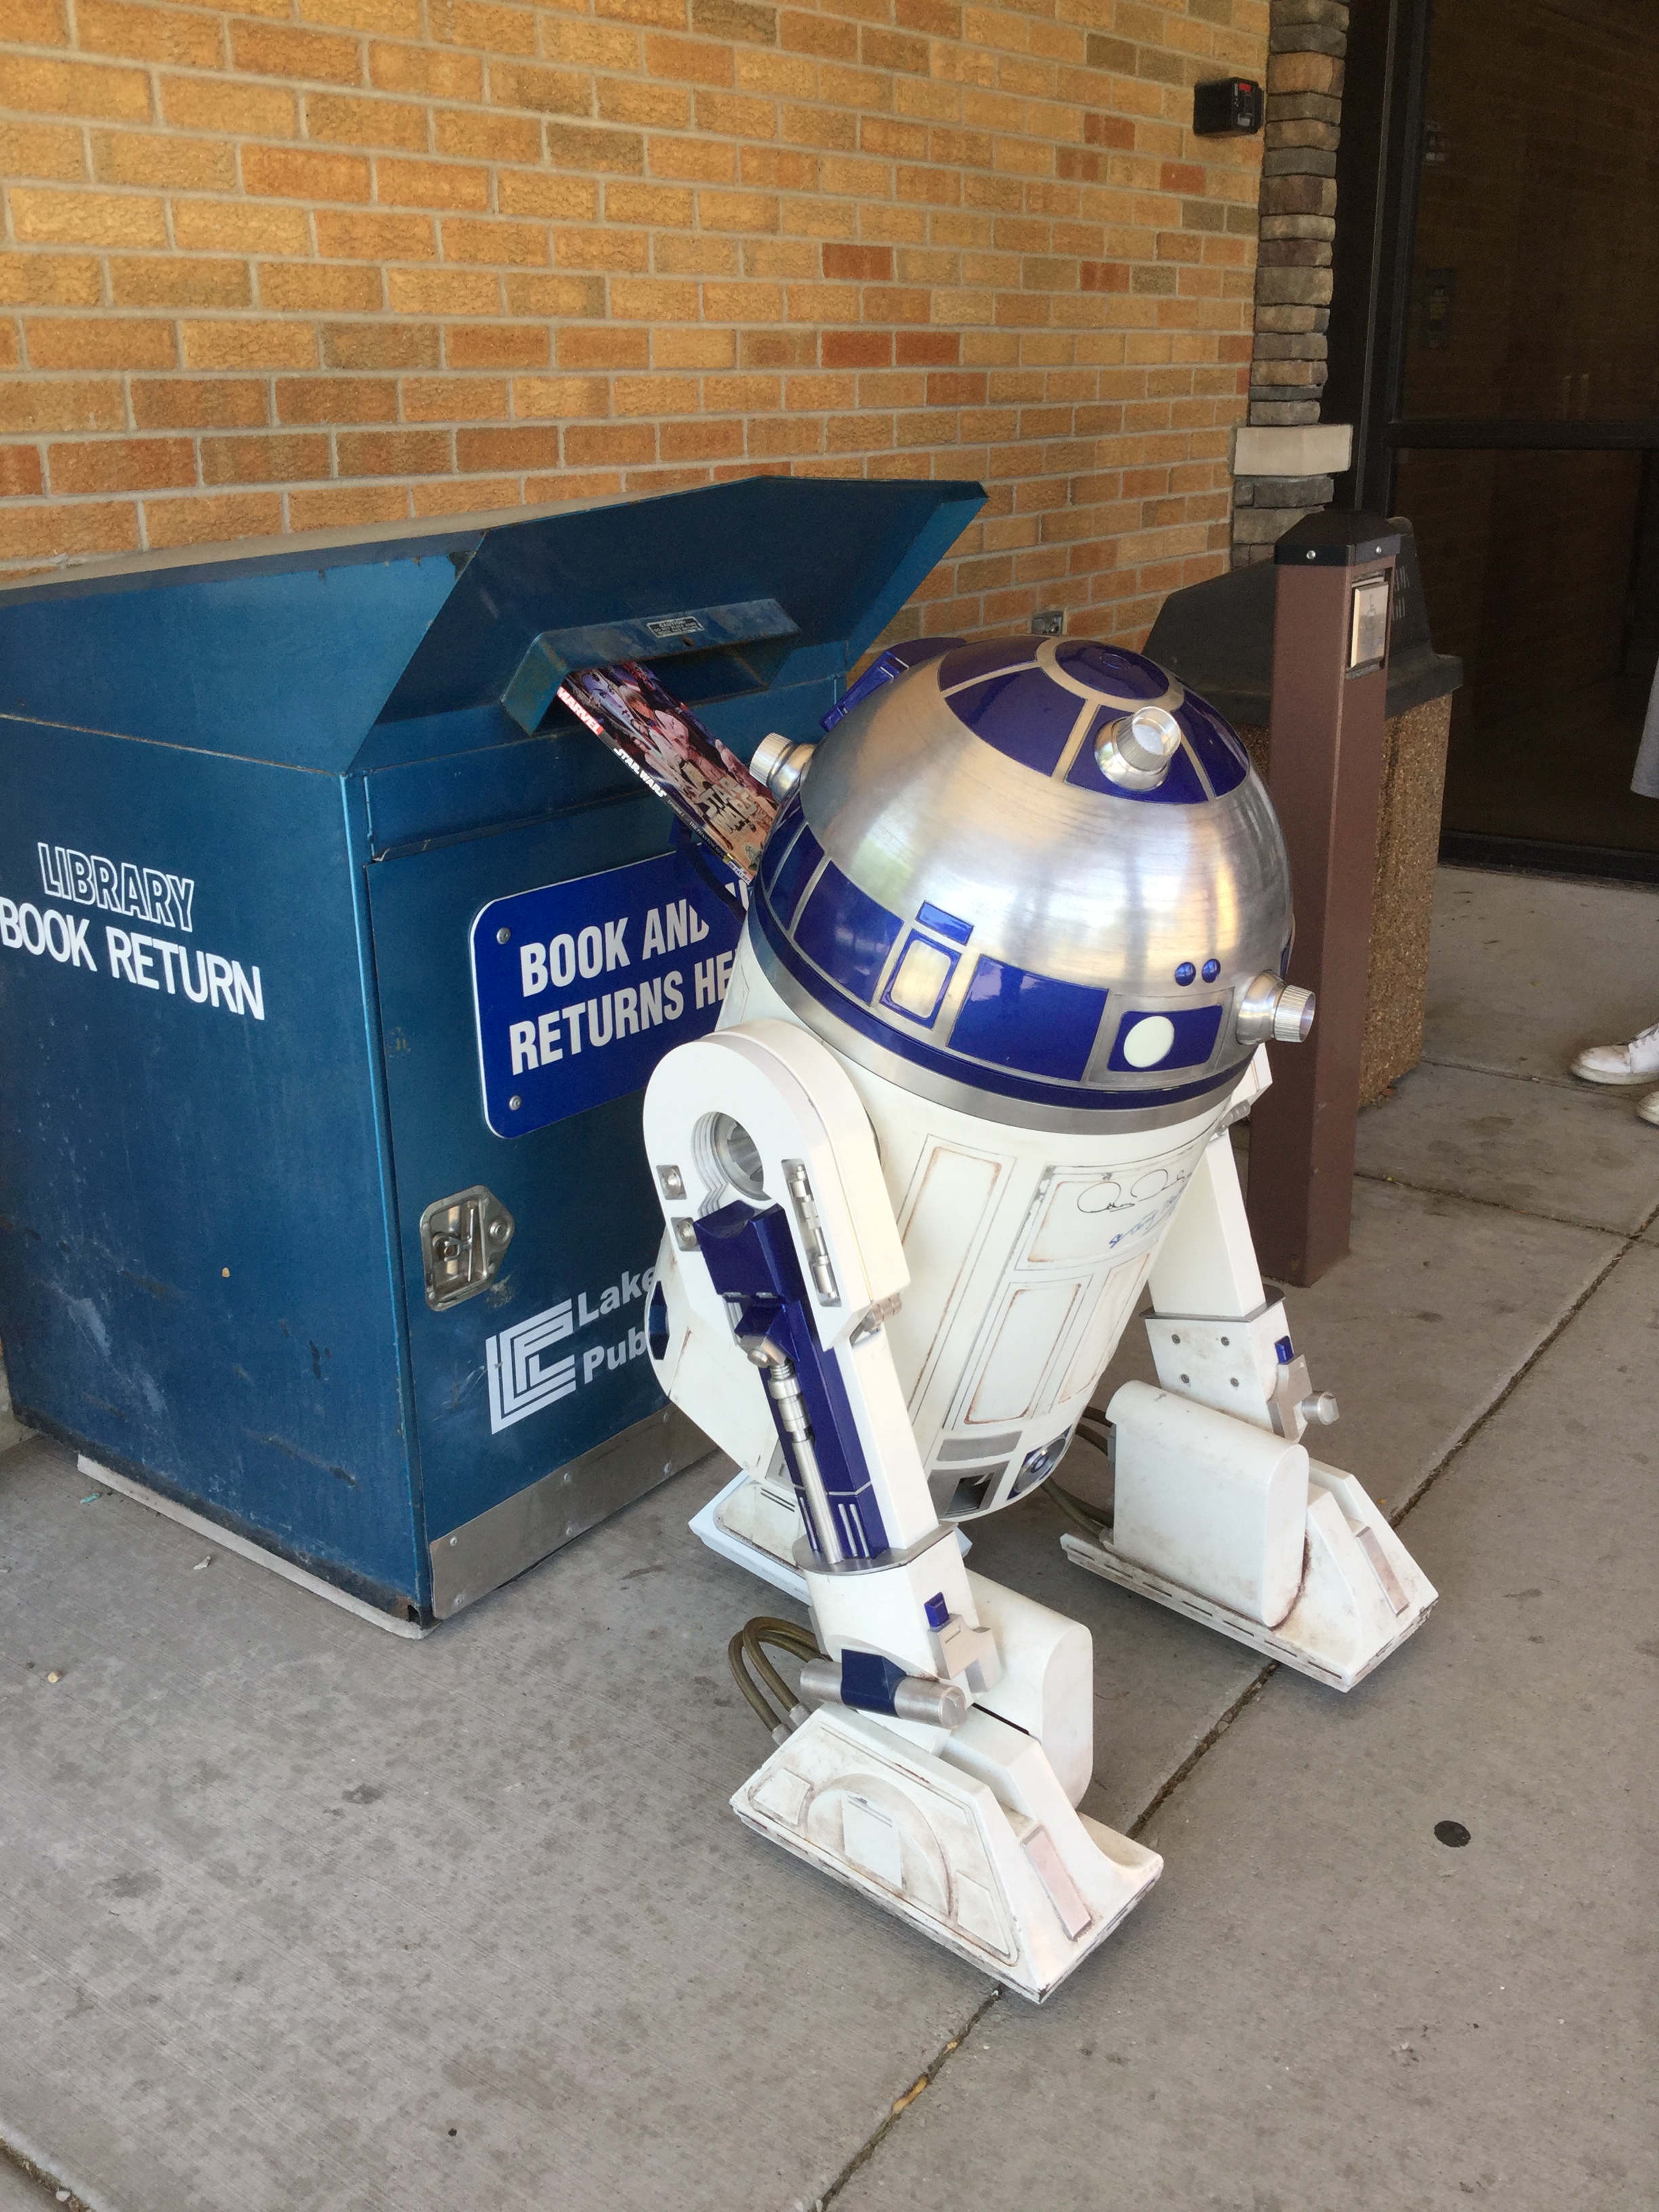 R2D2 pushes a star wars book into a book drop outside Munster Branch